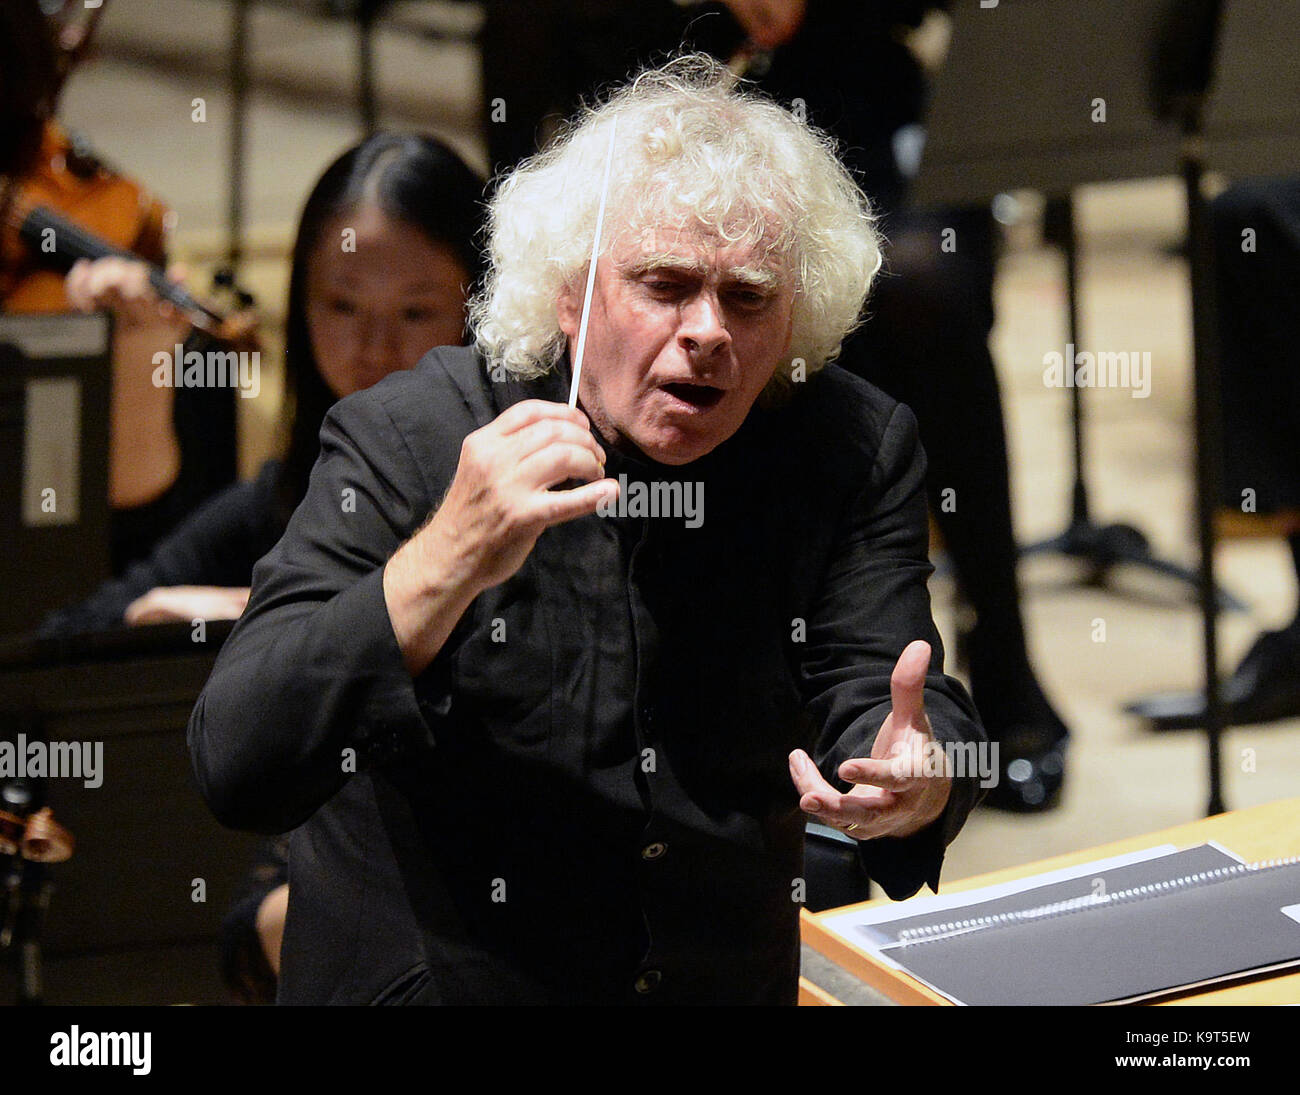 Sir Simon Rattle conducts 11-18-year-old musicians from east London on the closing day of ÔThis is Rattle', at the Barbican in London. PRESS ASSOCIATION. Picture date: Sunday September 24, 2017. The 54 young people perform with LSO players and musicians from the Guildhall School, all playing side-by-side on the Barbican stage, performing music from Elgar's ÔEnigma Variations' and Stravinsky's ÔThe Rite of Spring'. The performance is part of the ÔLSO On Track' programme, which has seen LSO players work with thousands of young people from east London since 2008, in activities Stock Photo